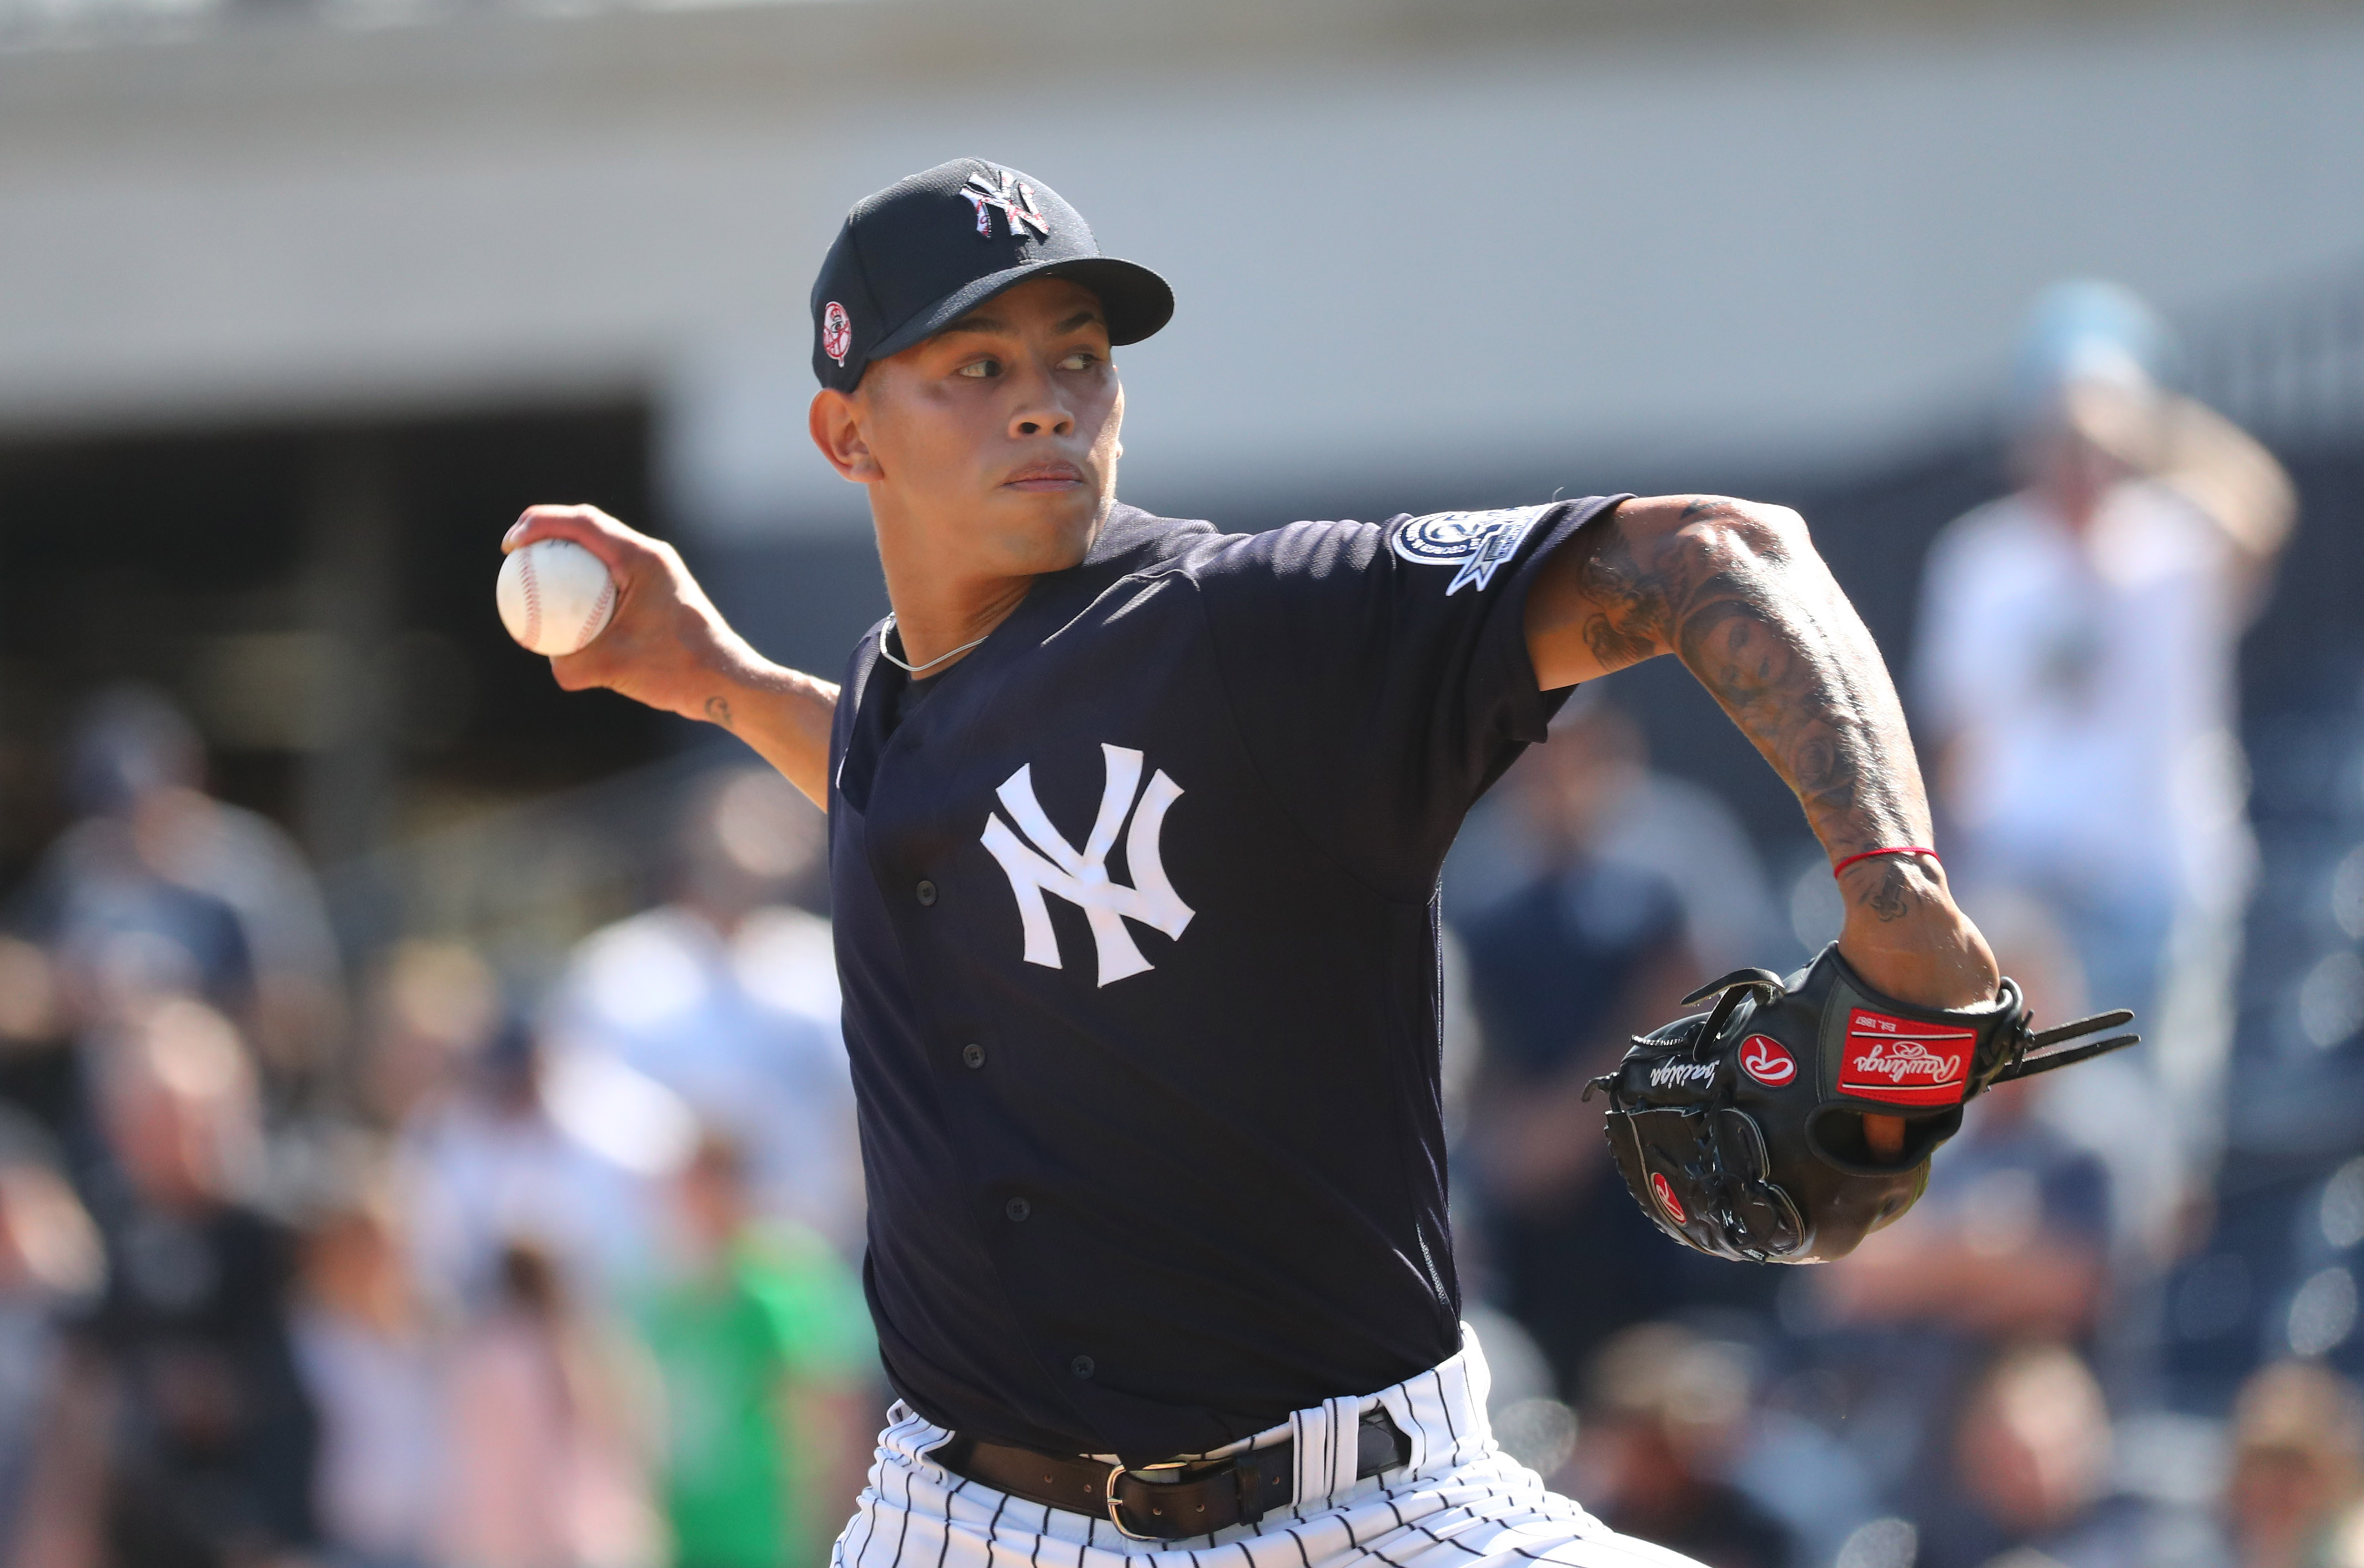 New York Yankees: Jonathan Loaisiga reveals his preferred pitching